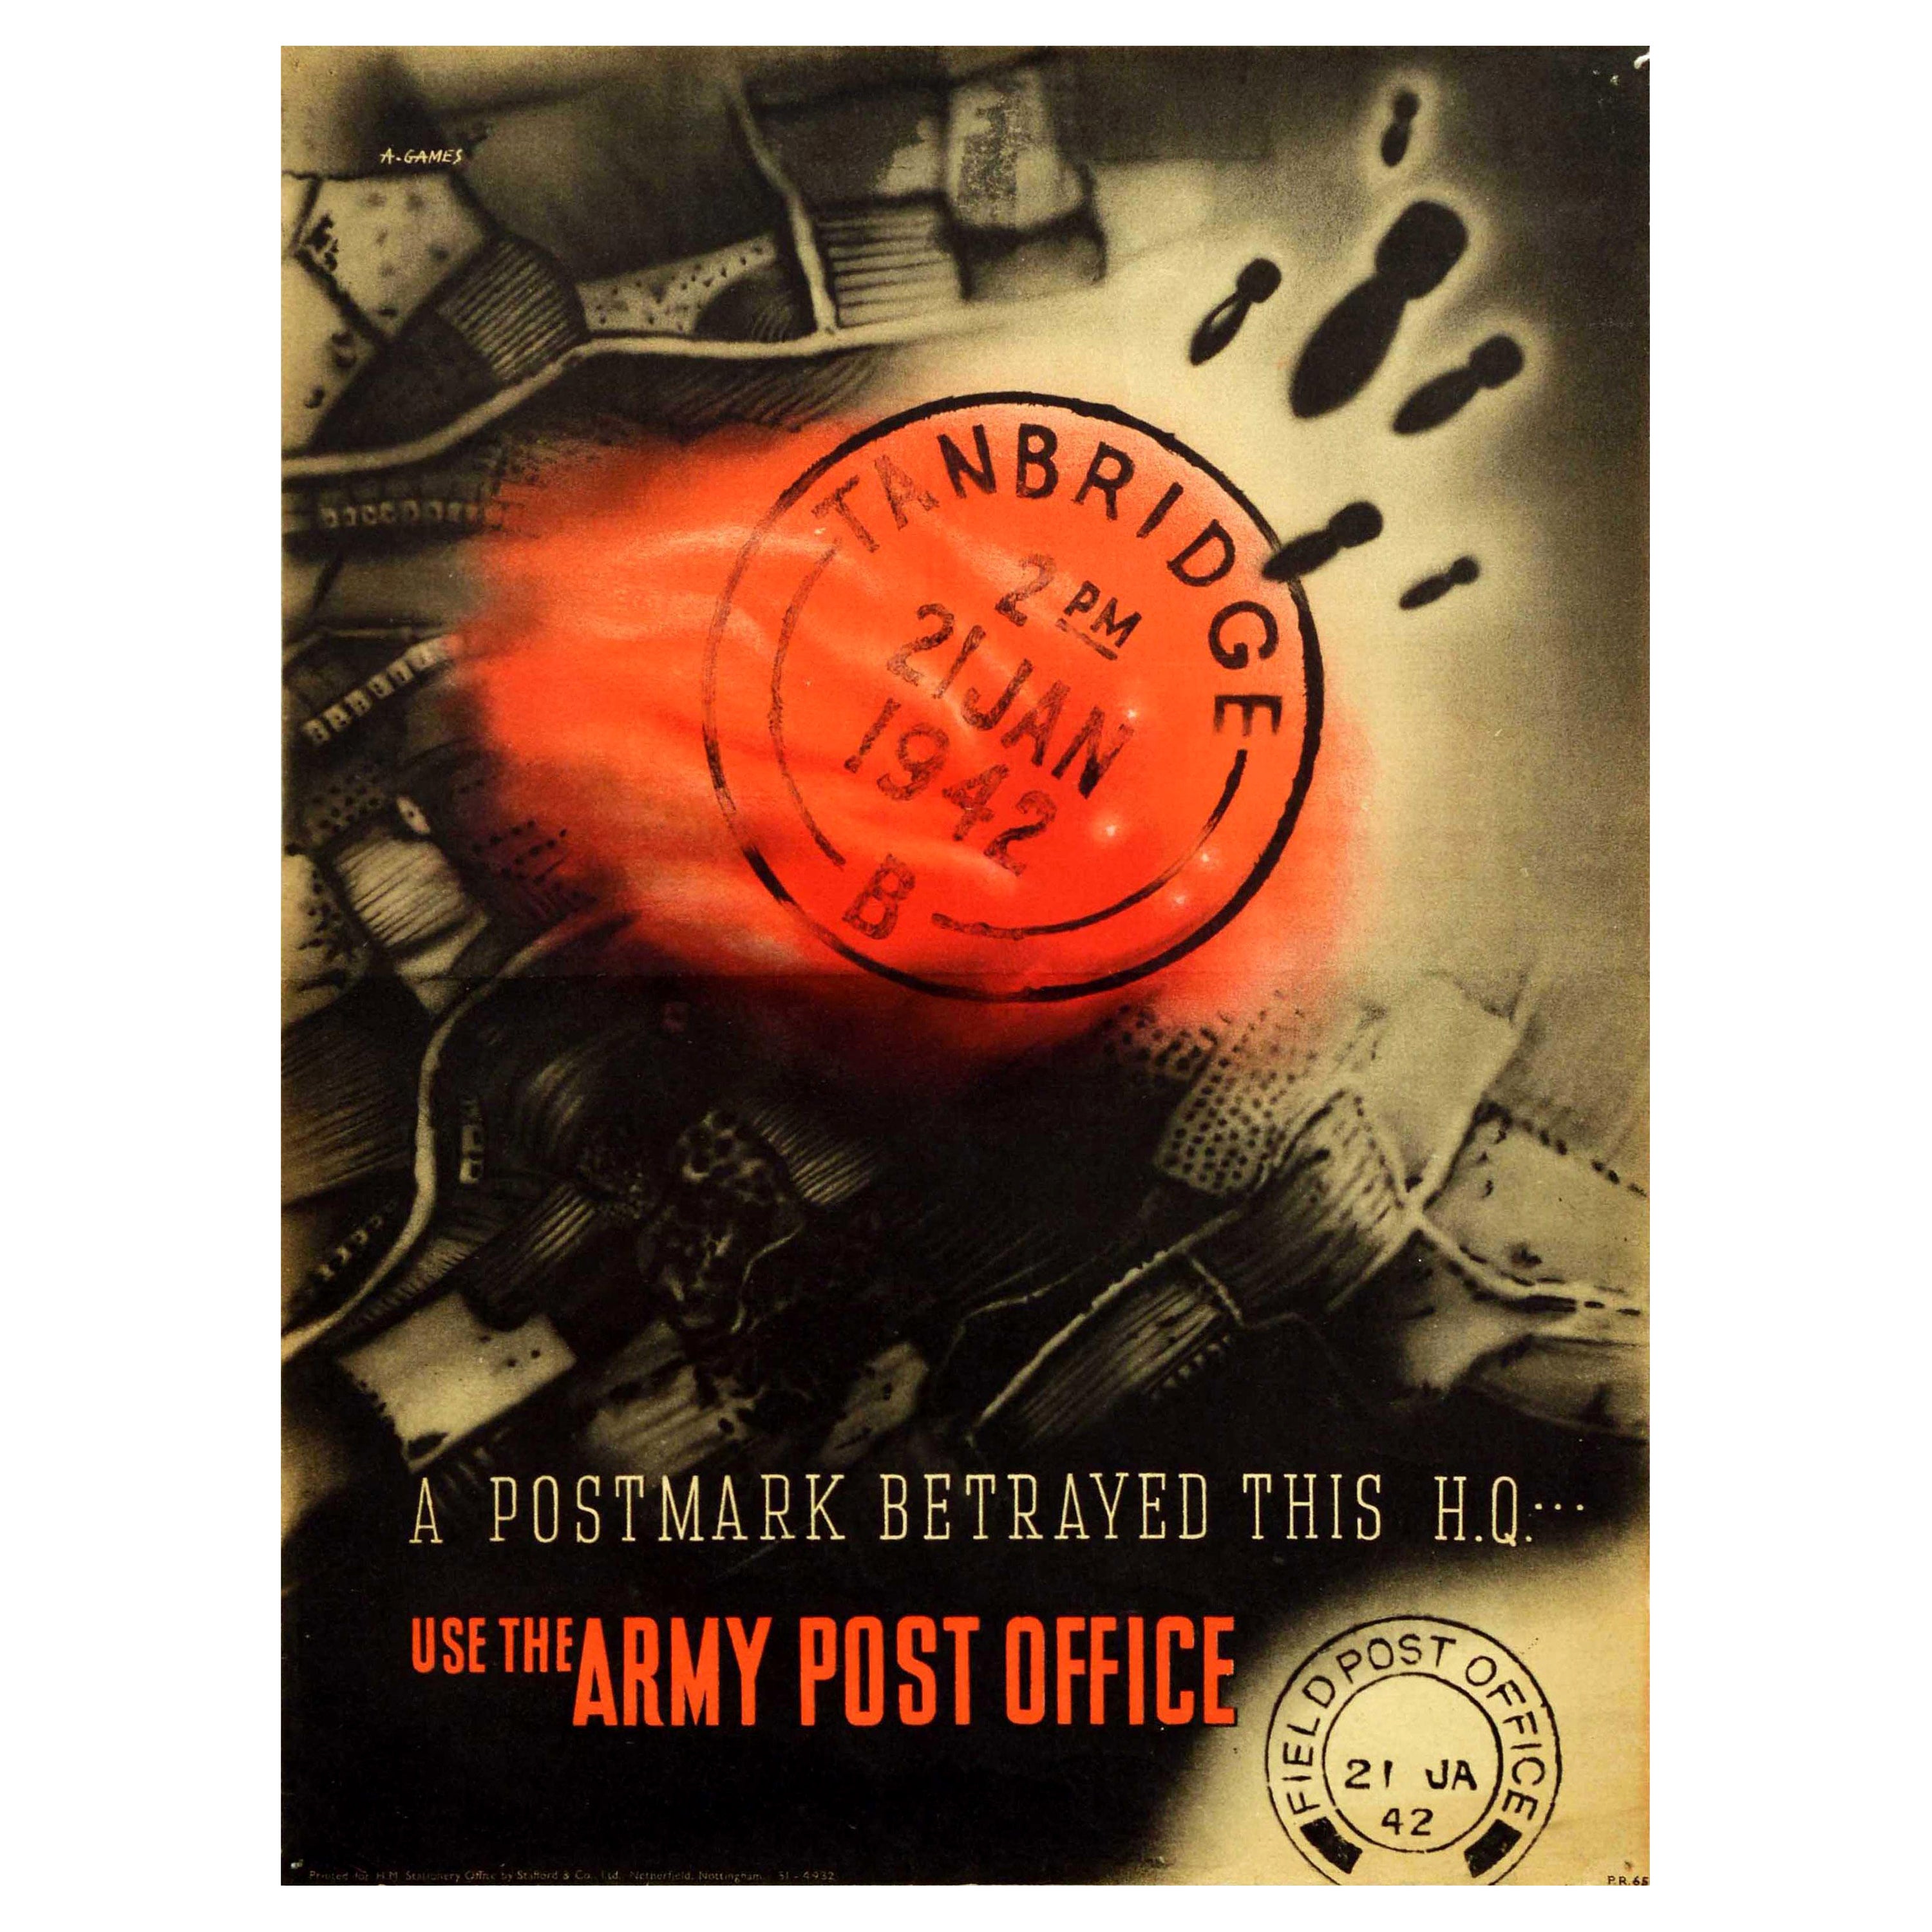 Original Vintage War Poster Postmark Betrayed HQ Army Post Office WWII Modernism For Sale